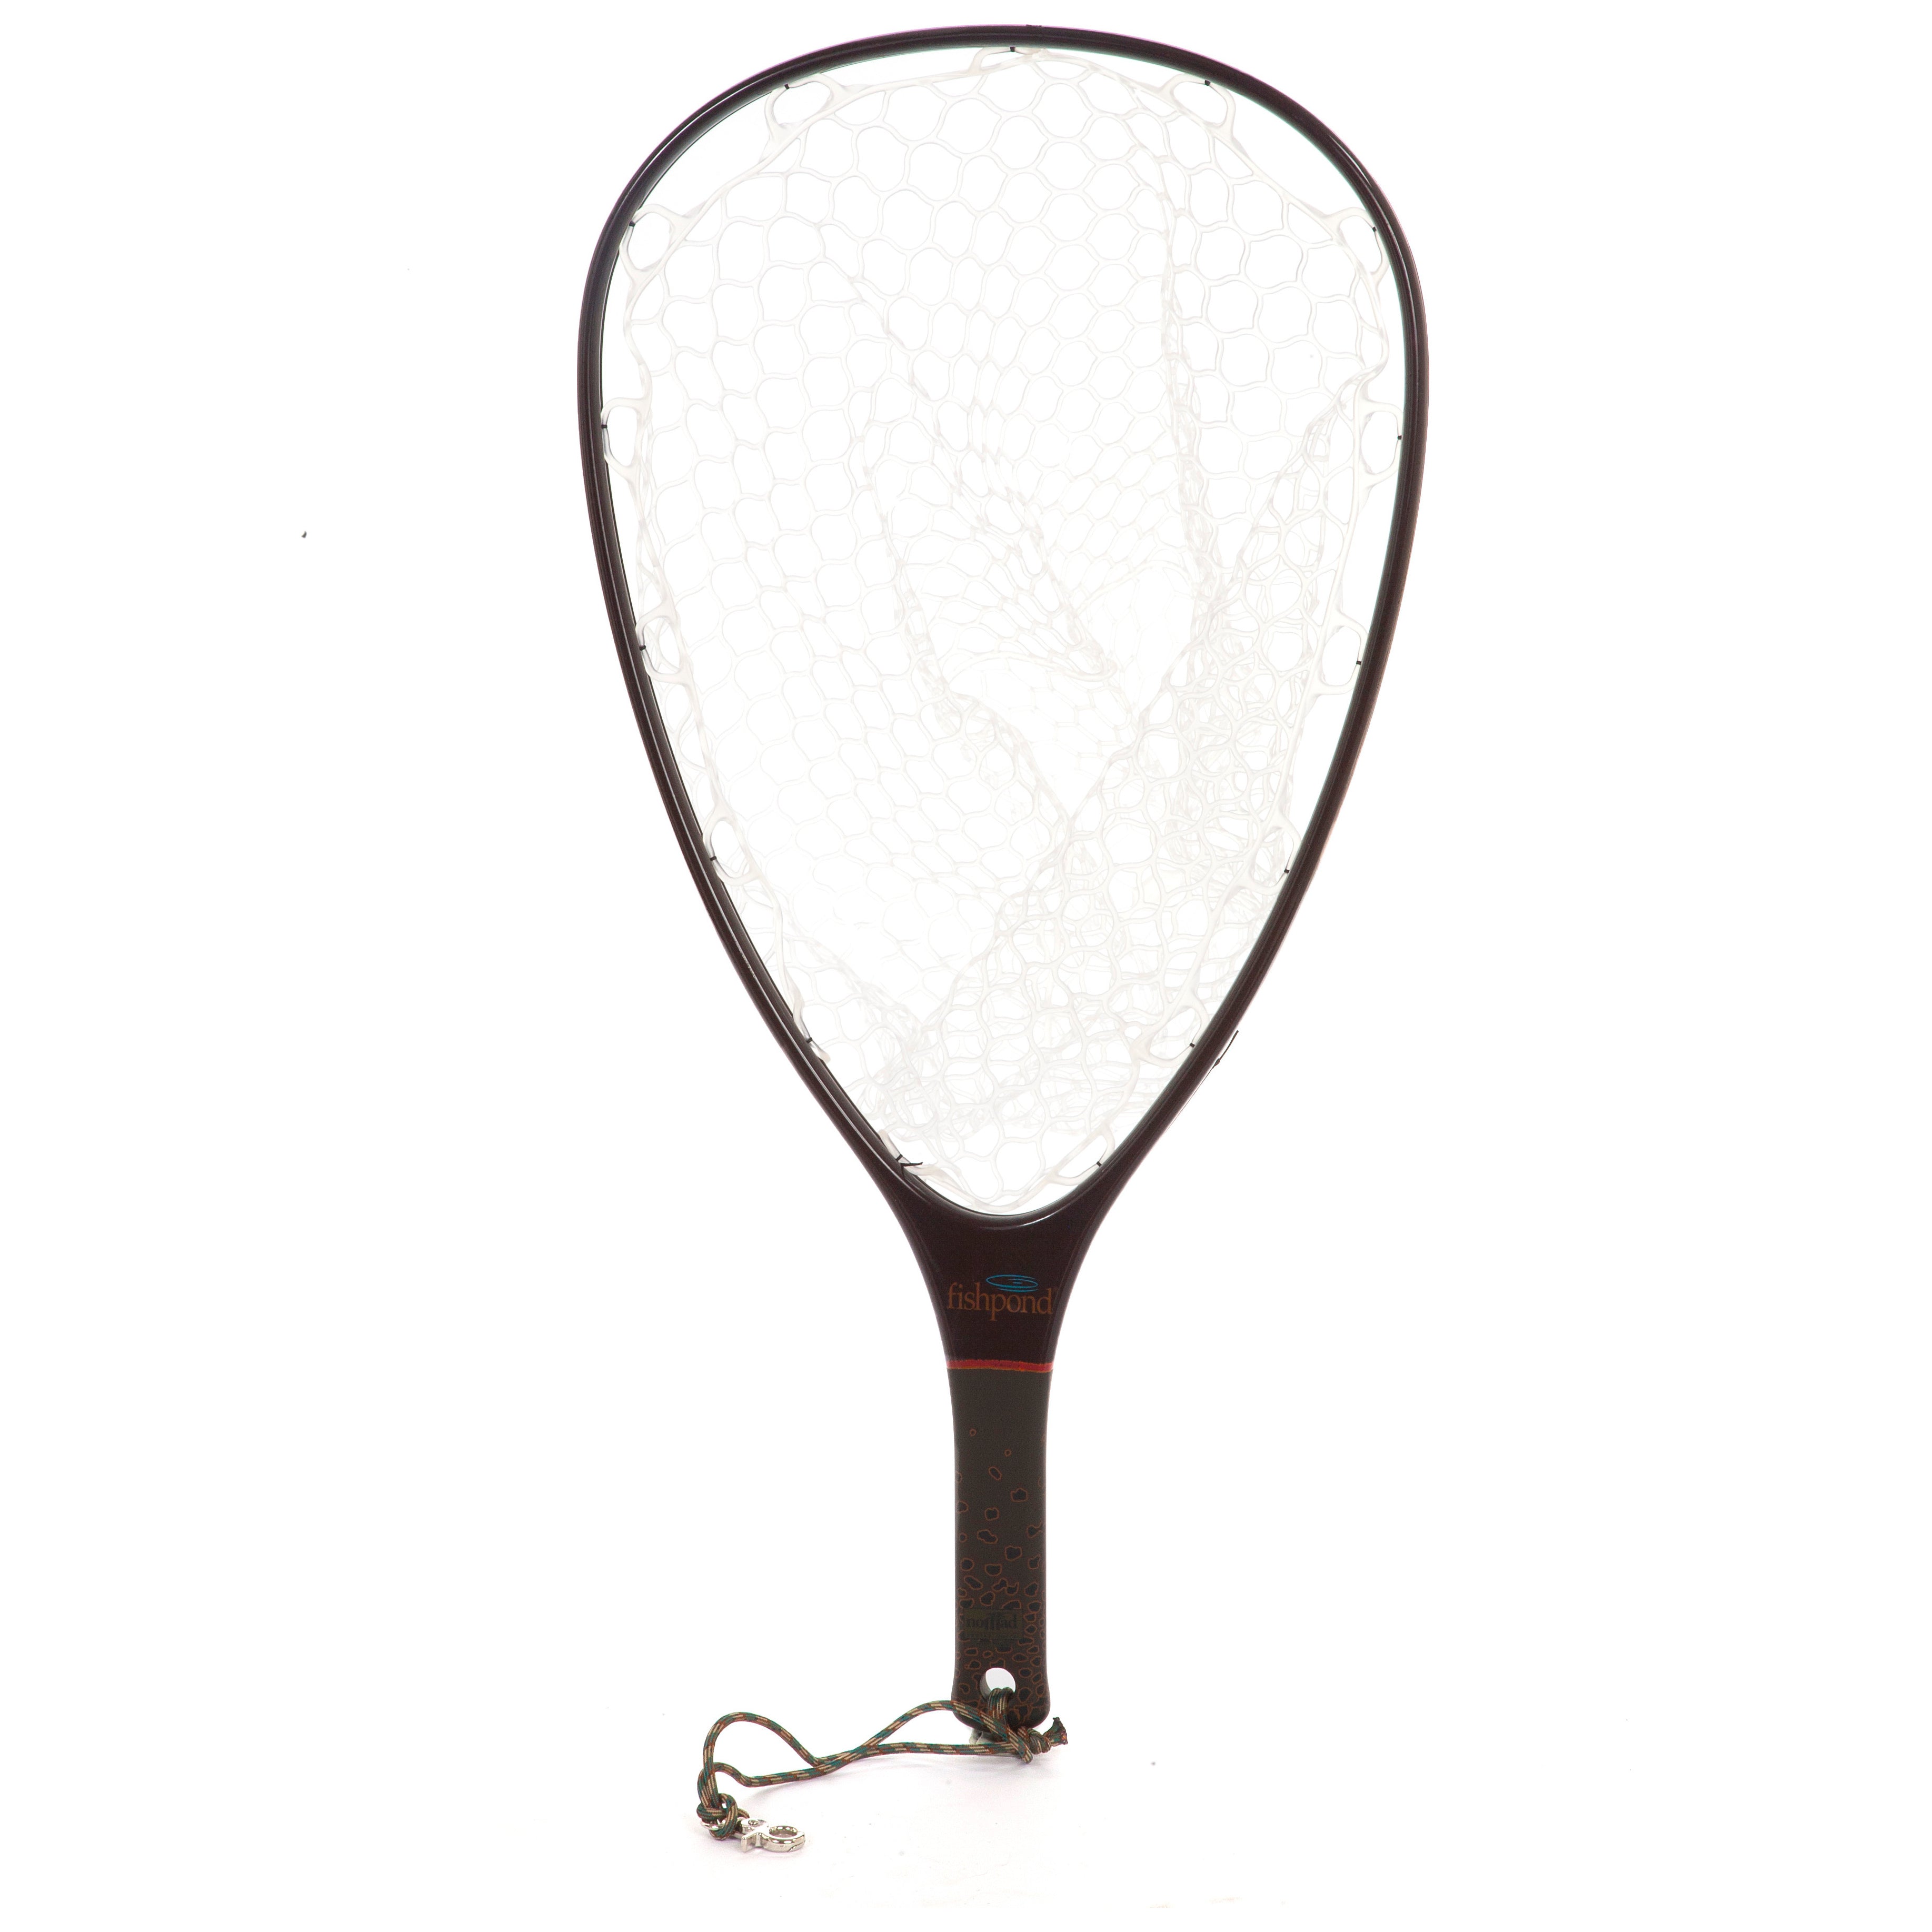 Fishpond Nomad Hand Net Tailwater Image 01